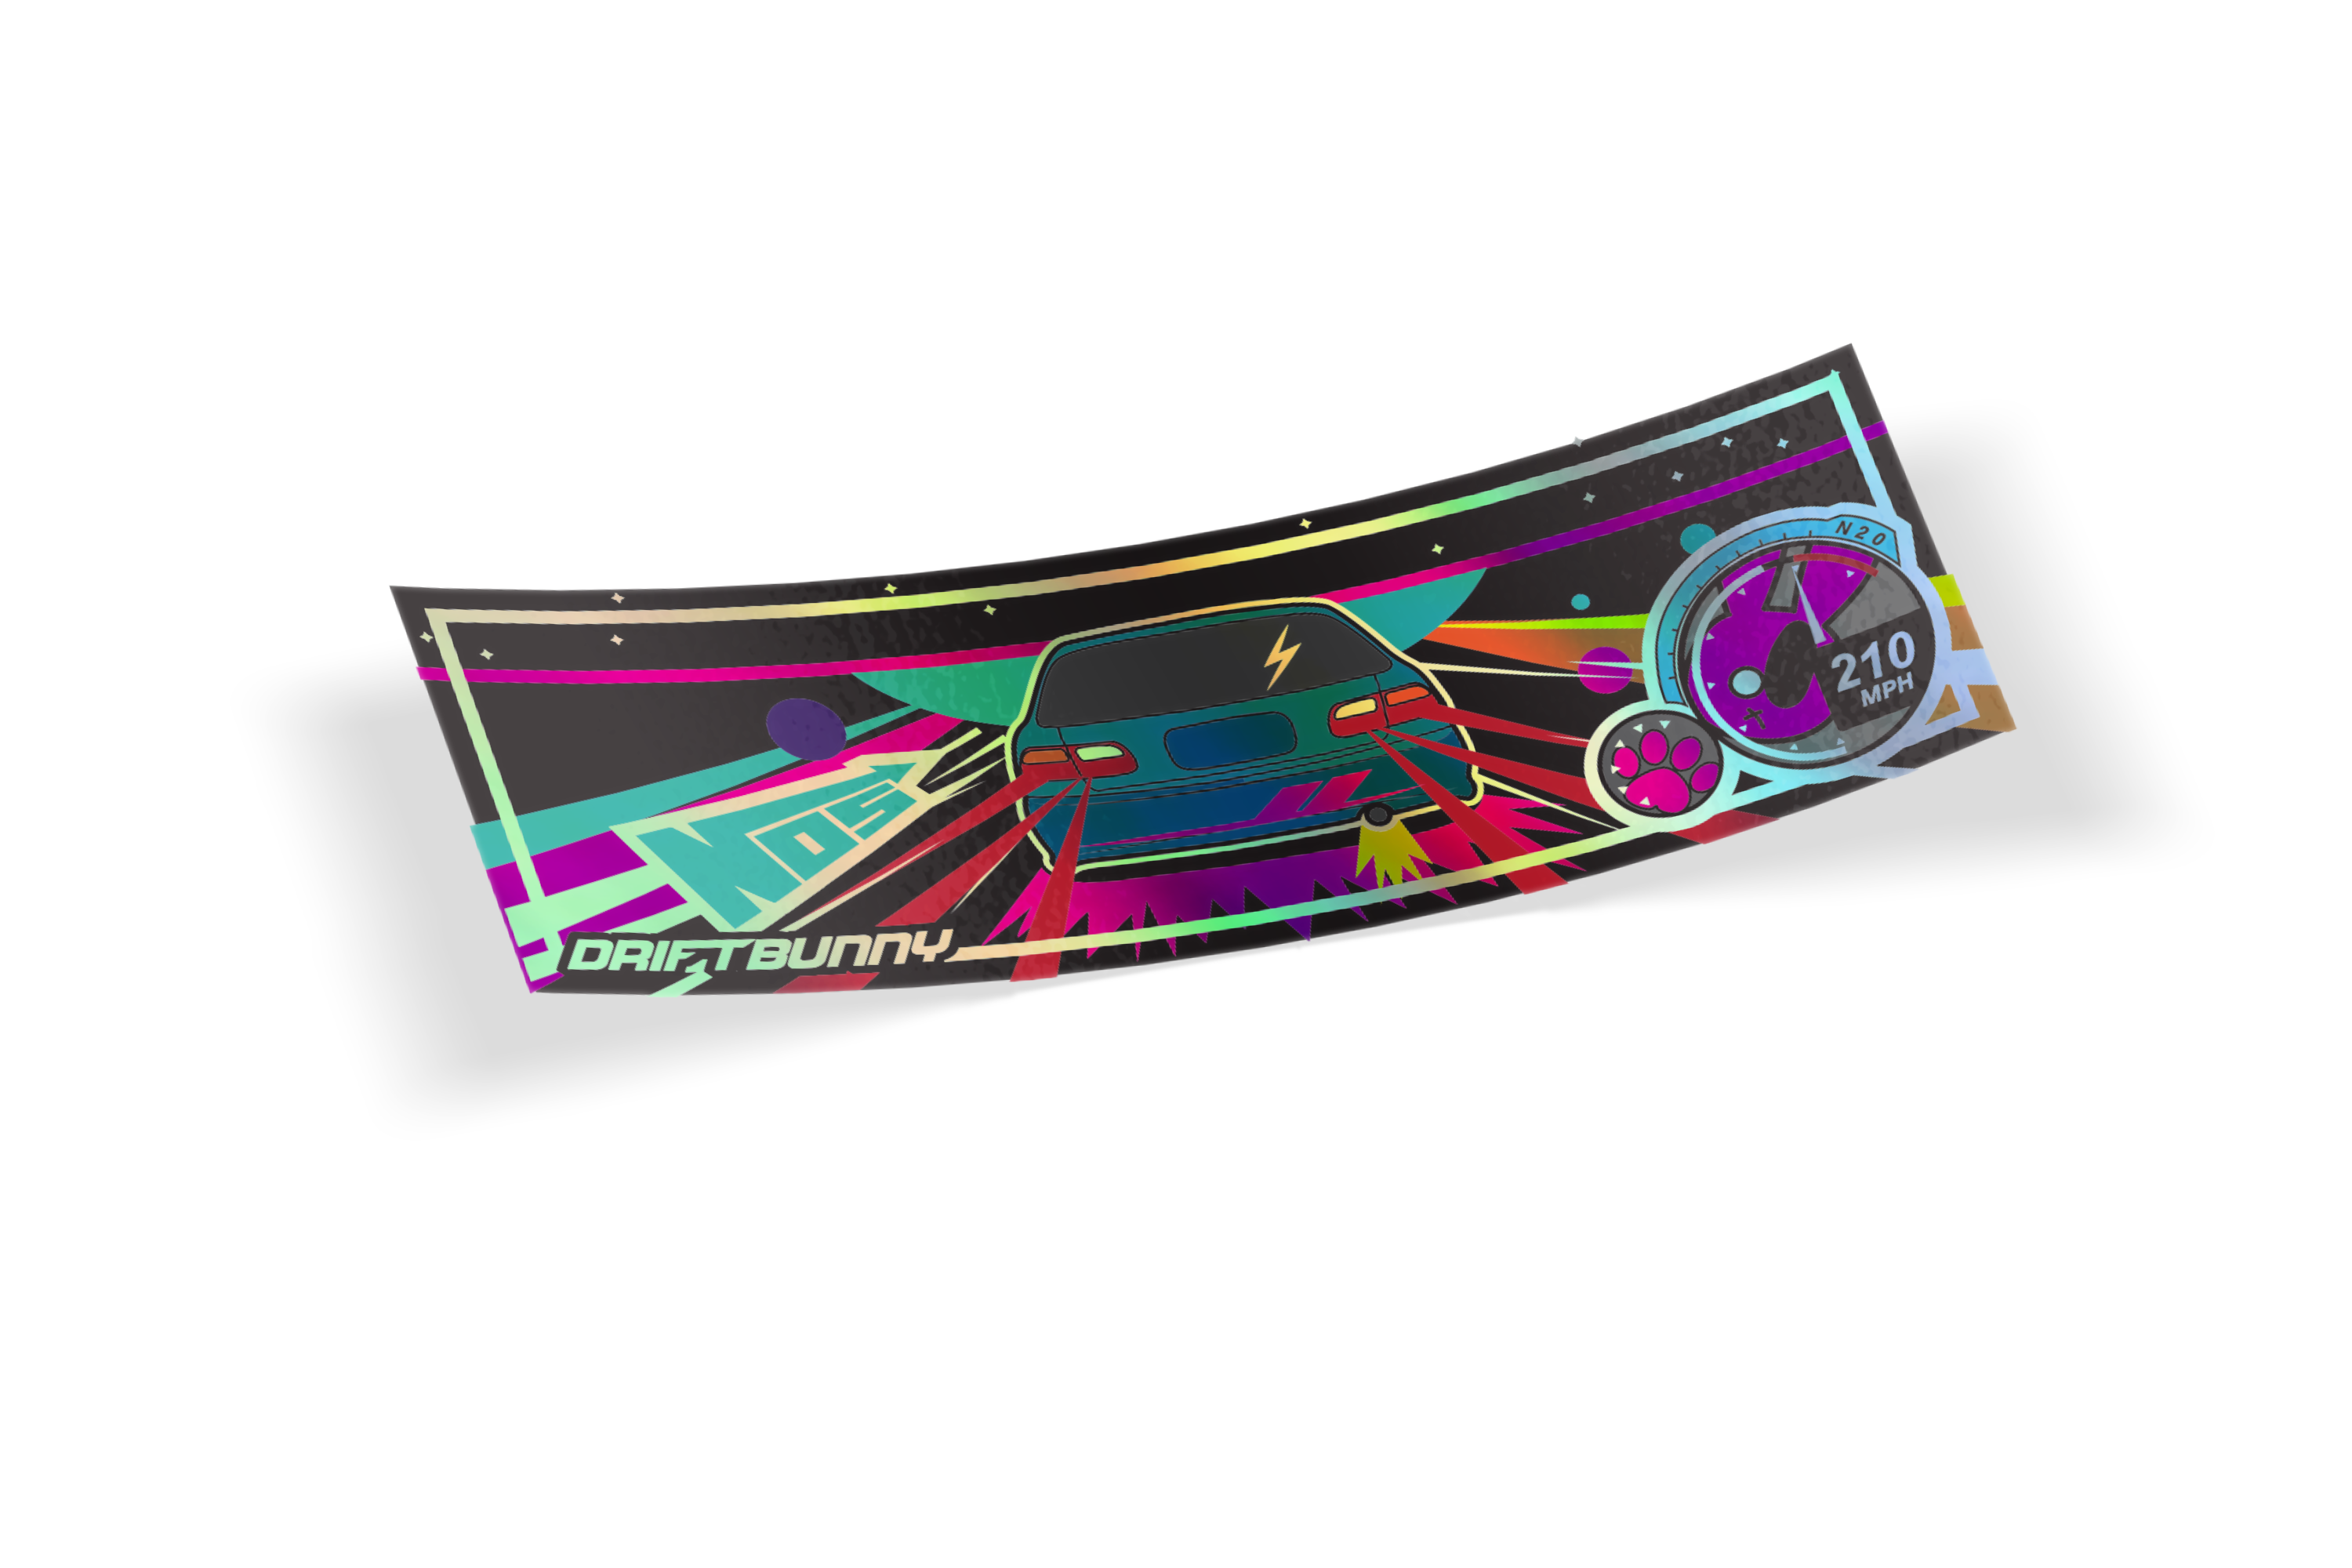 Gamer NFS Holo - civic new Drift bunny decals